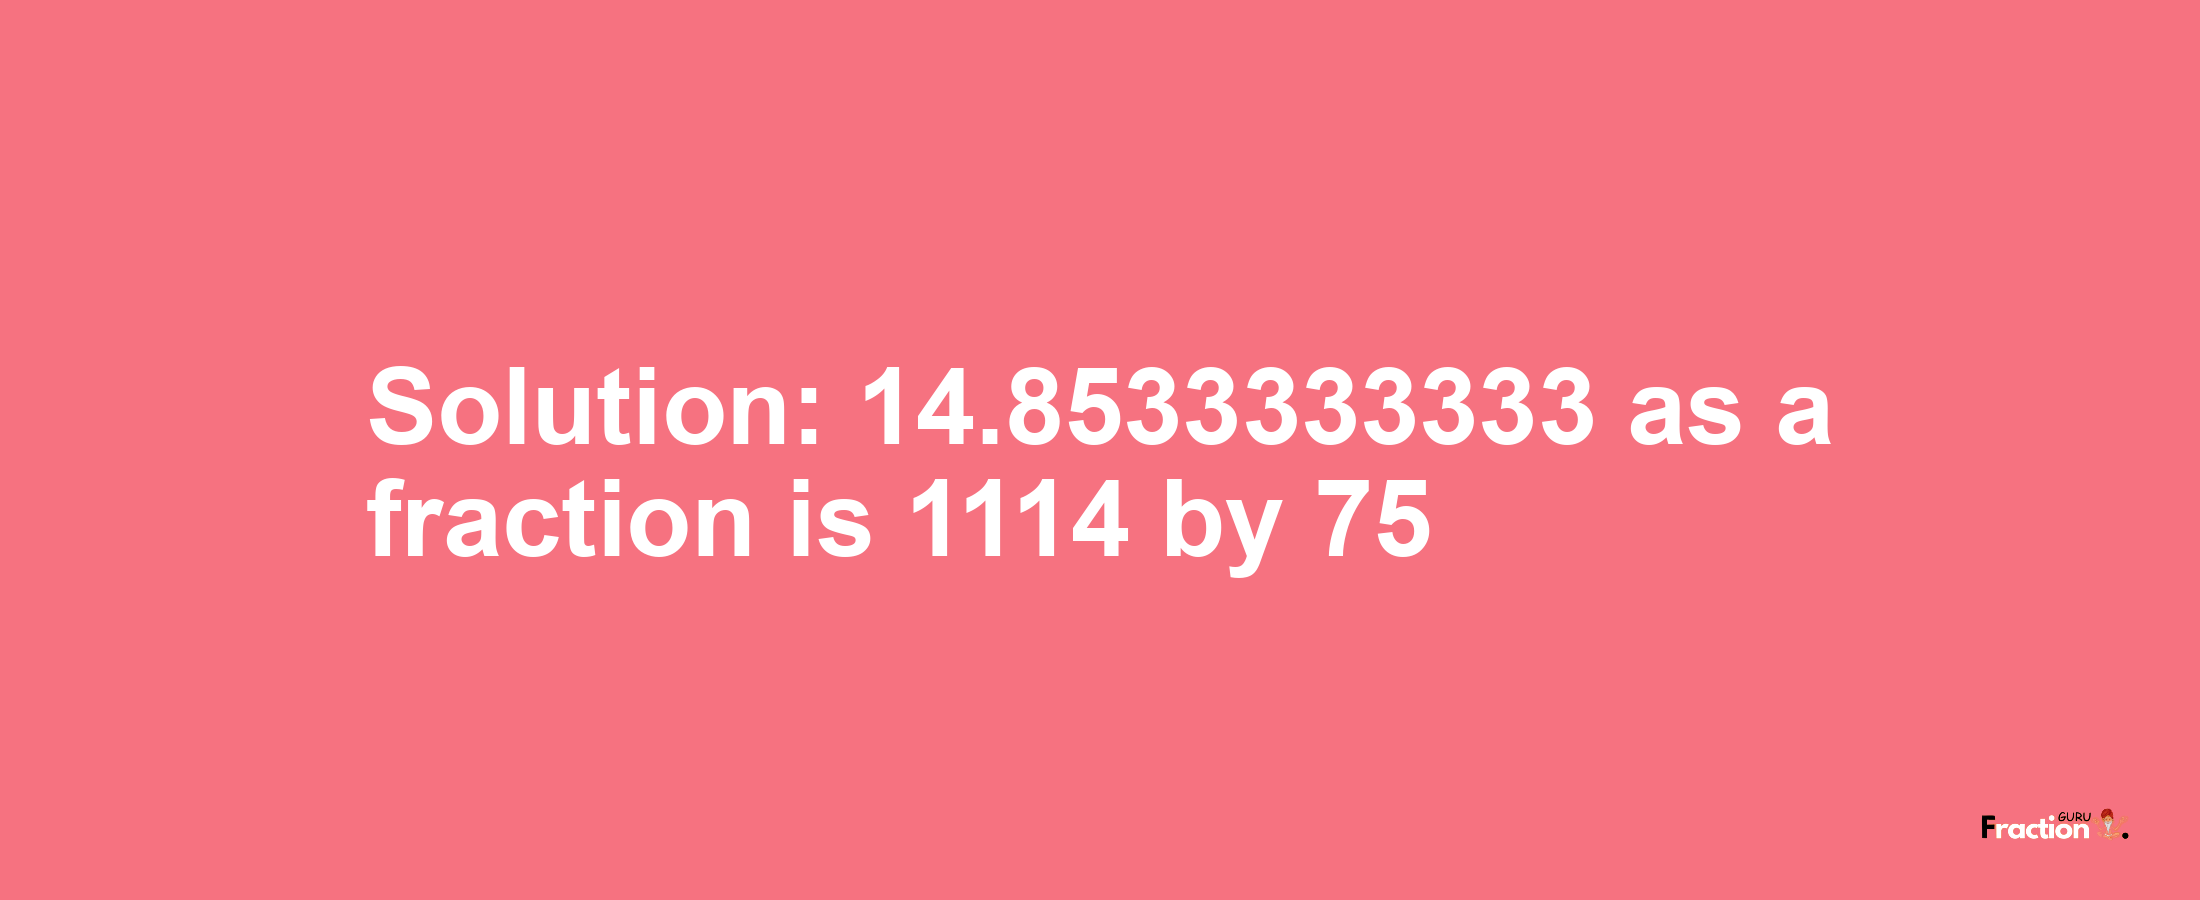 Solution:14.8533333333 as a fraction is 1114/75